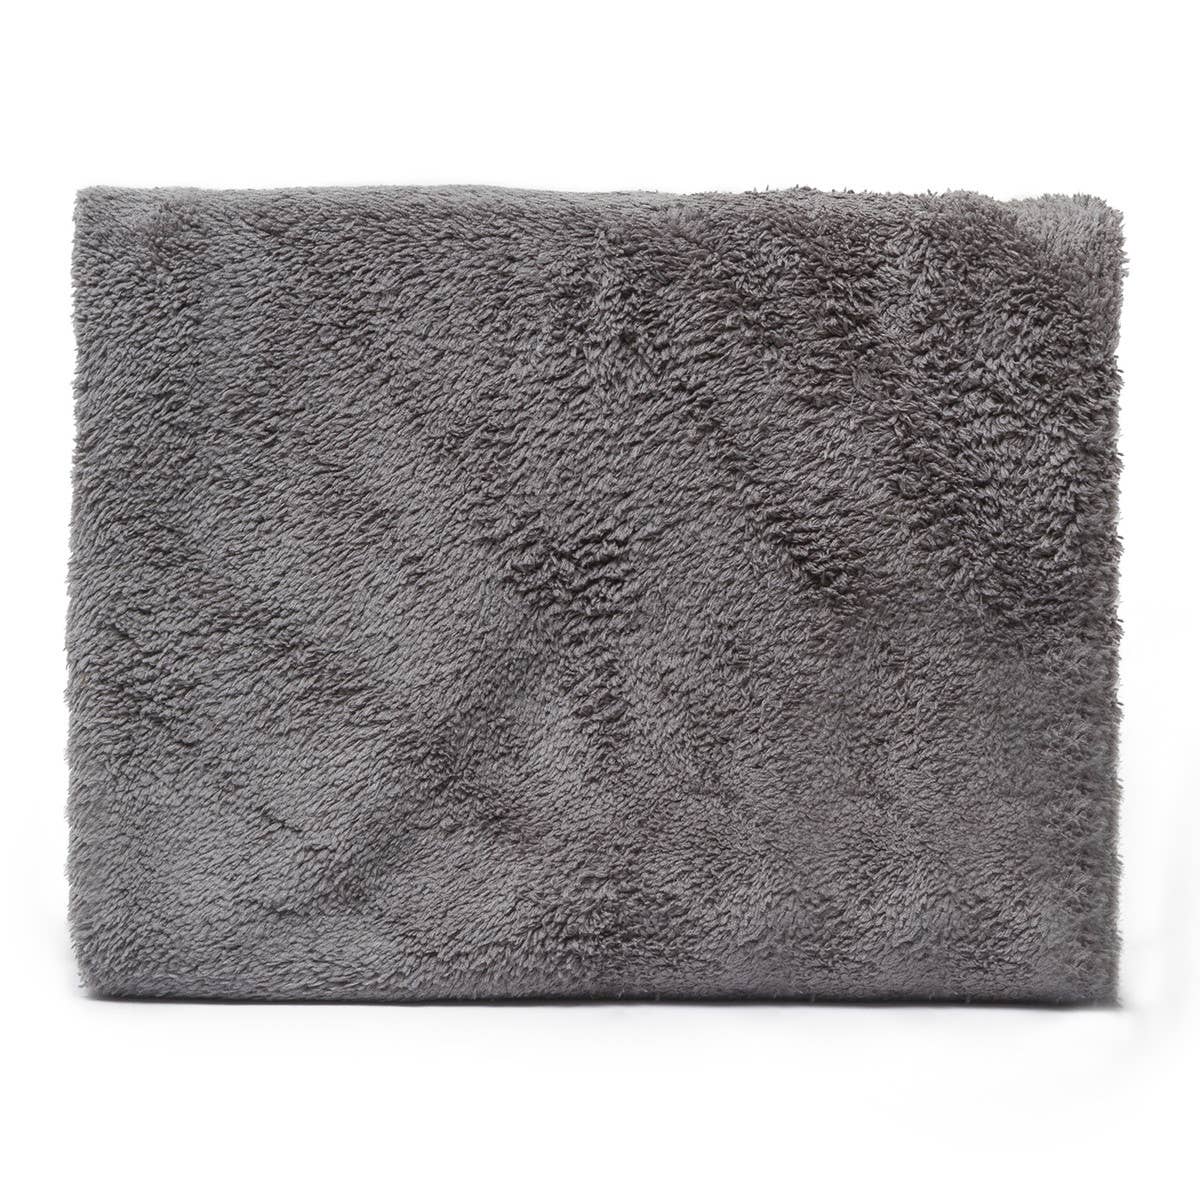 Messy Mutts Microfiber Towel -Cool Grey MED 20x32